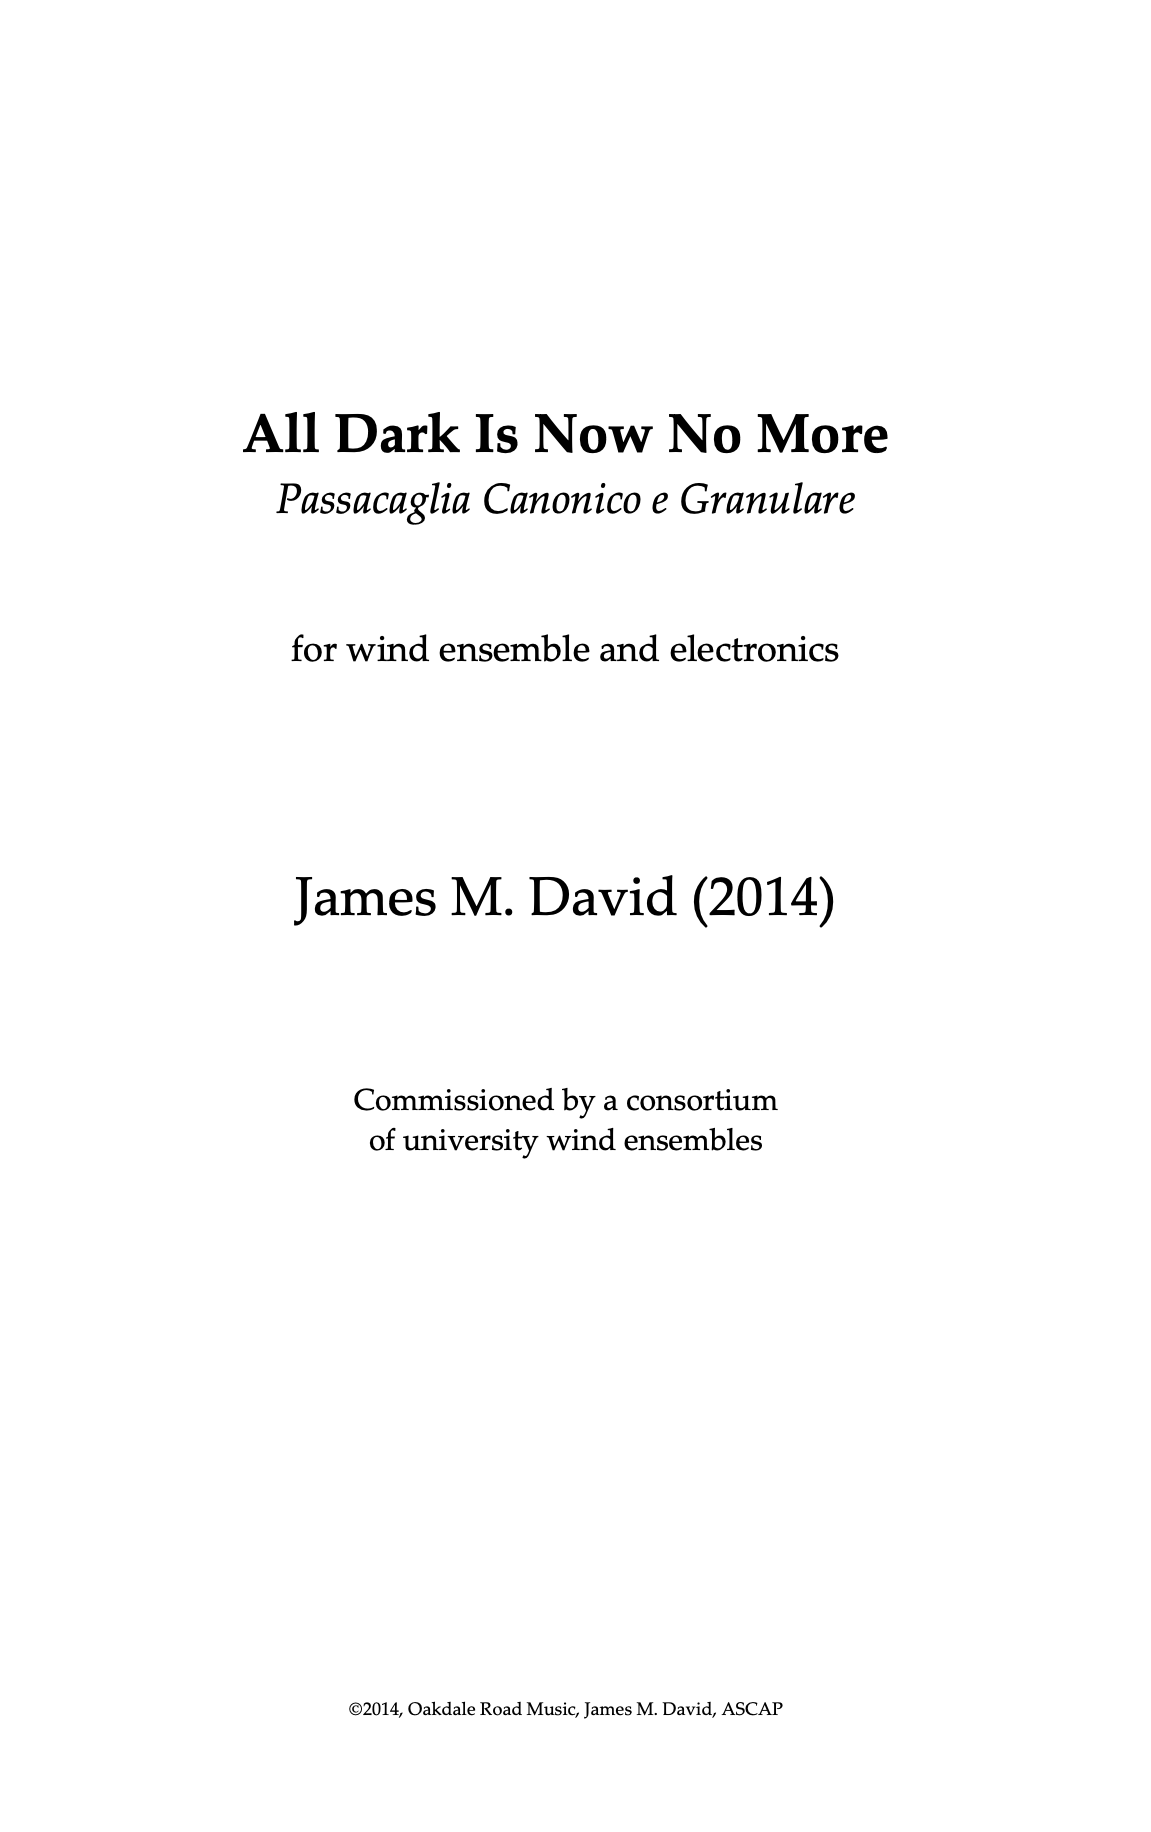 All Dark Is Now No More (Score Only) by James David